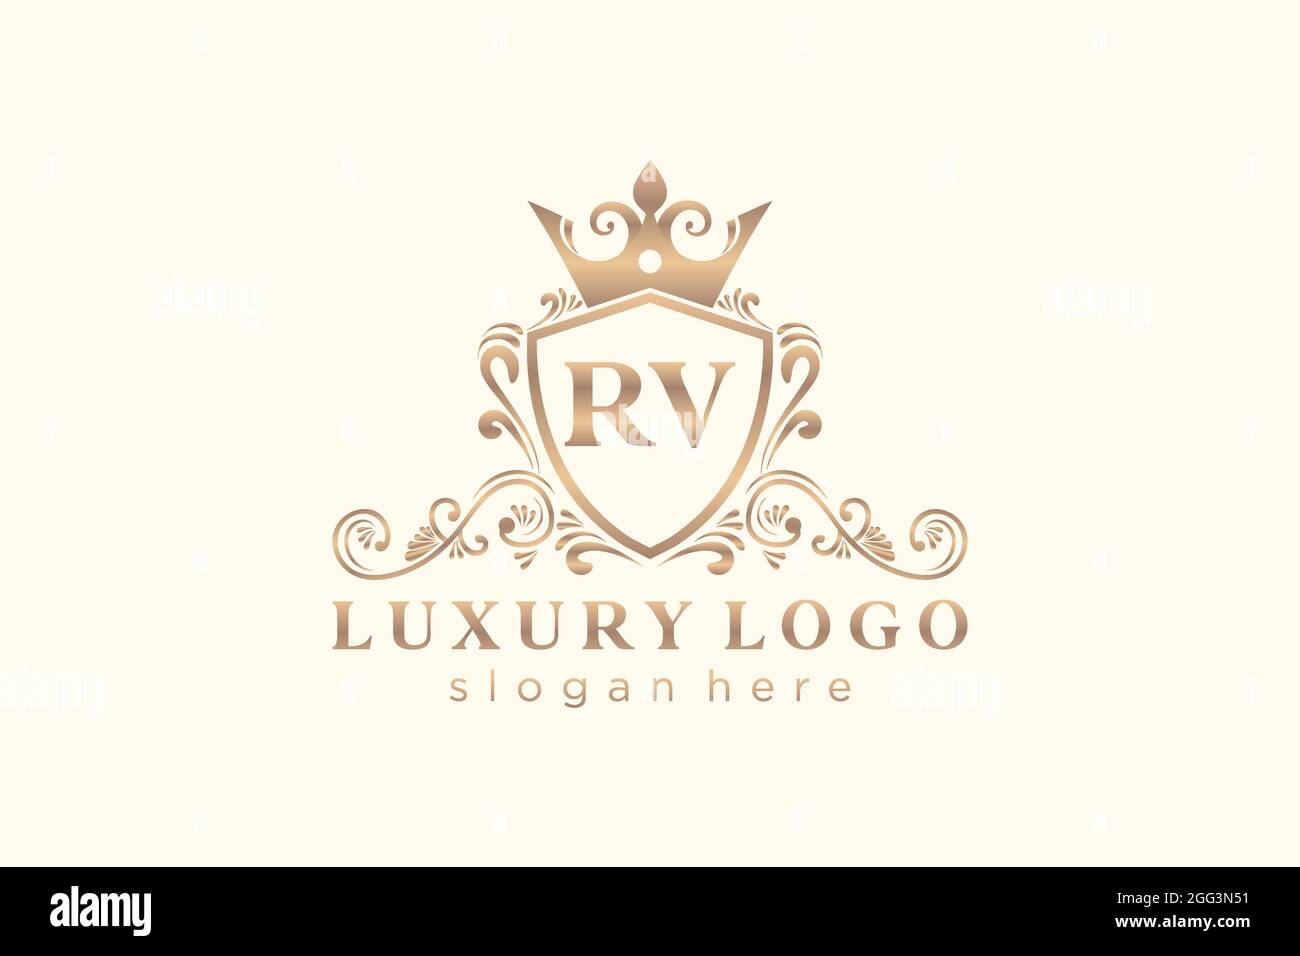 RV Letter Royal Luxury Logo template in vector art for Restaurant, Royalty, Boutique, Cafe, Hotel, Heraldic, Jewelry, Fashion and other vector illustr Stock Vector